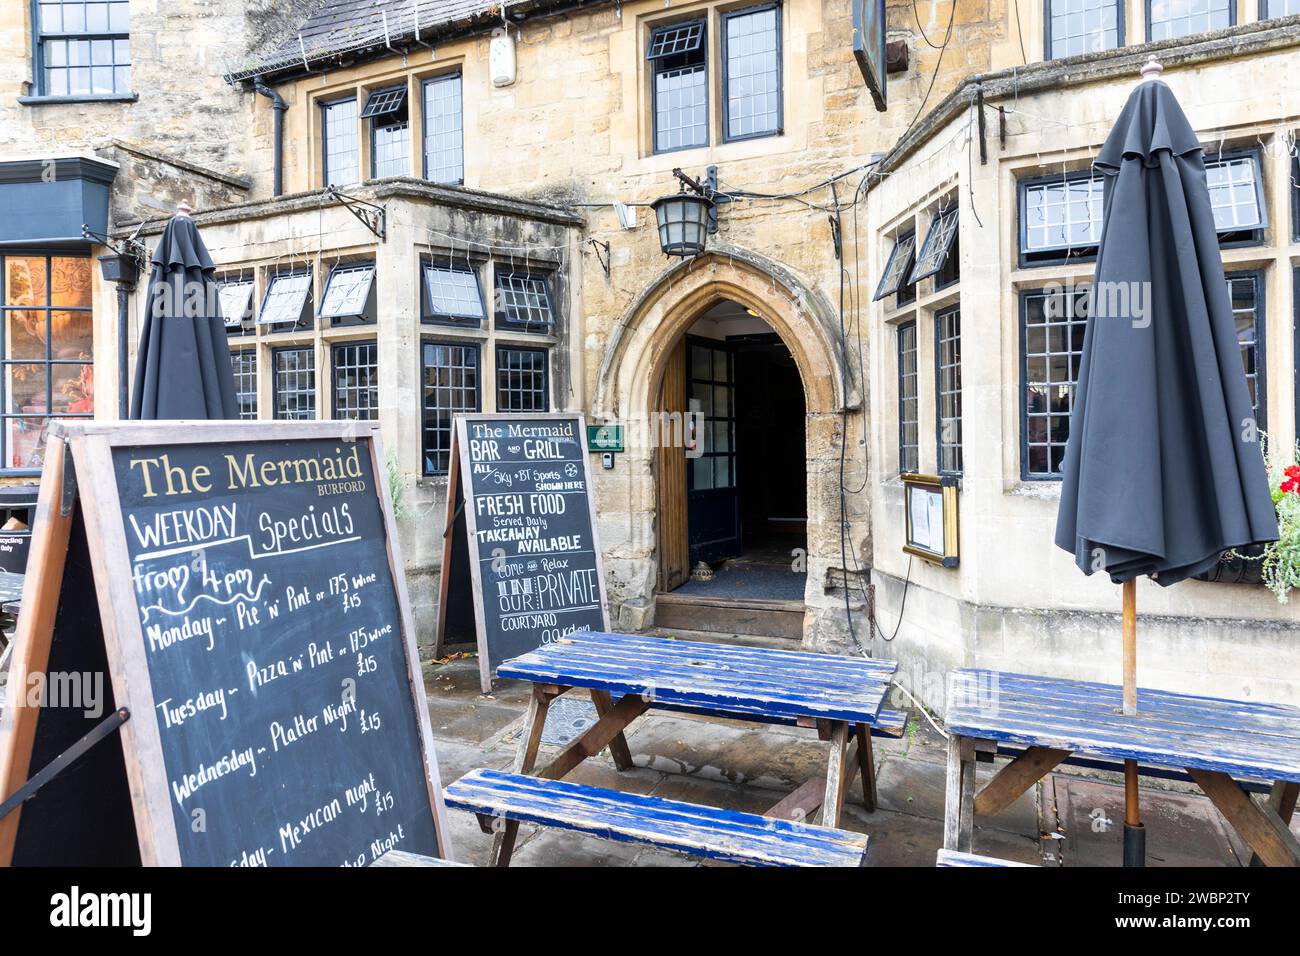 Burford town centre in the Cotswolds, Oxfordshire, and high street pub The Mermaid Inn, exterior view with menu, England,UK,2023 Stock Photo